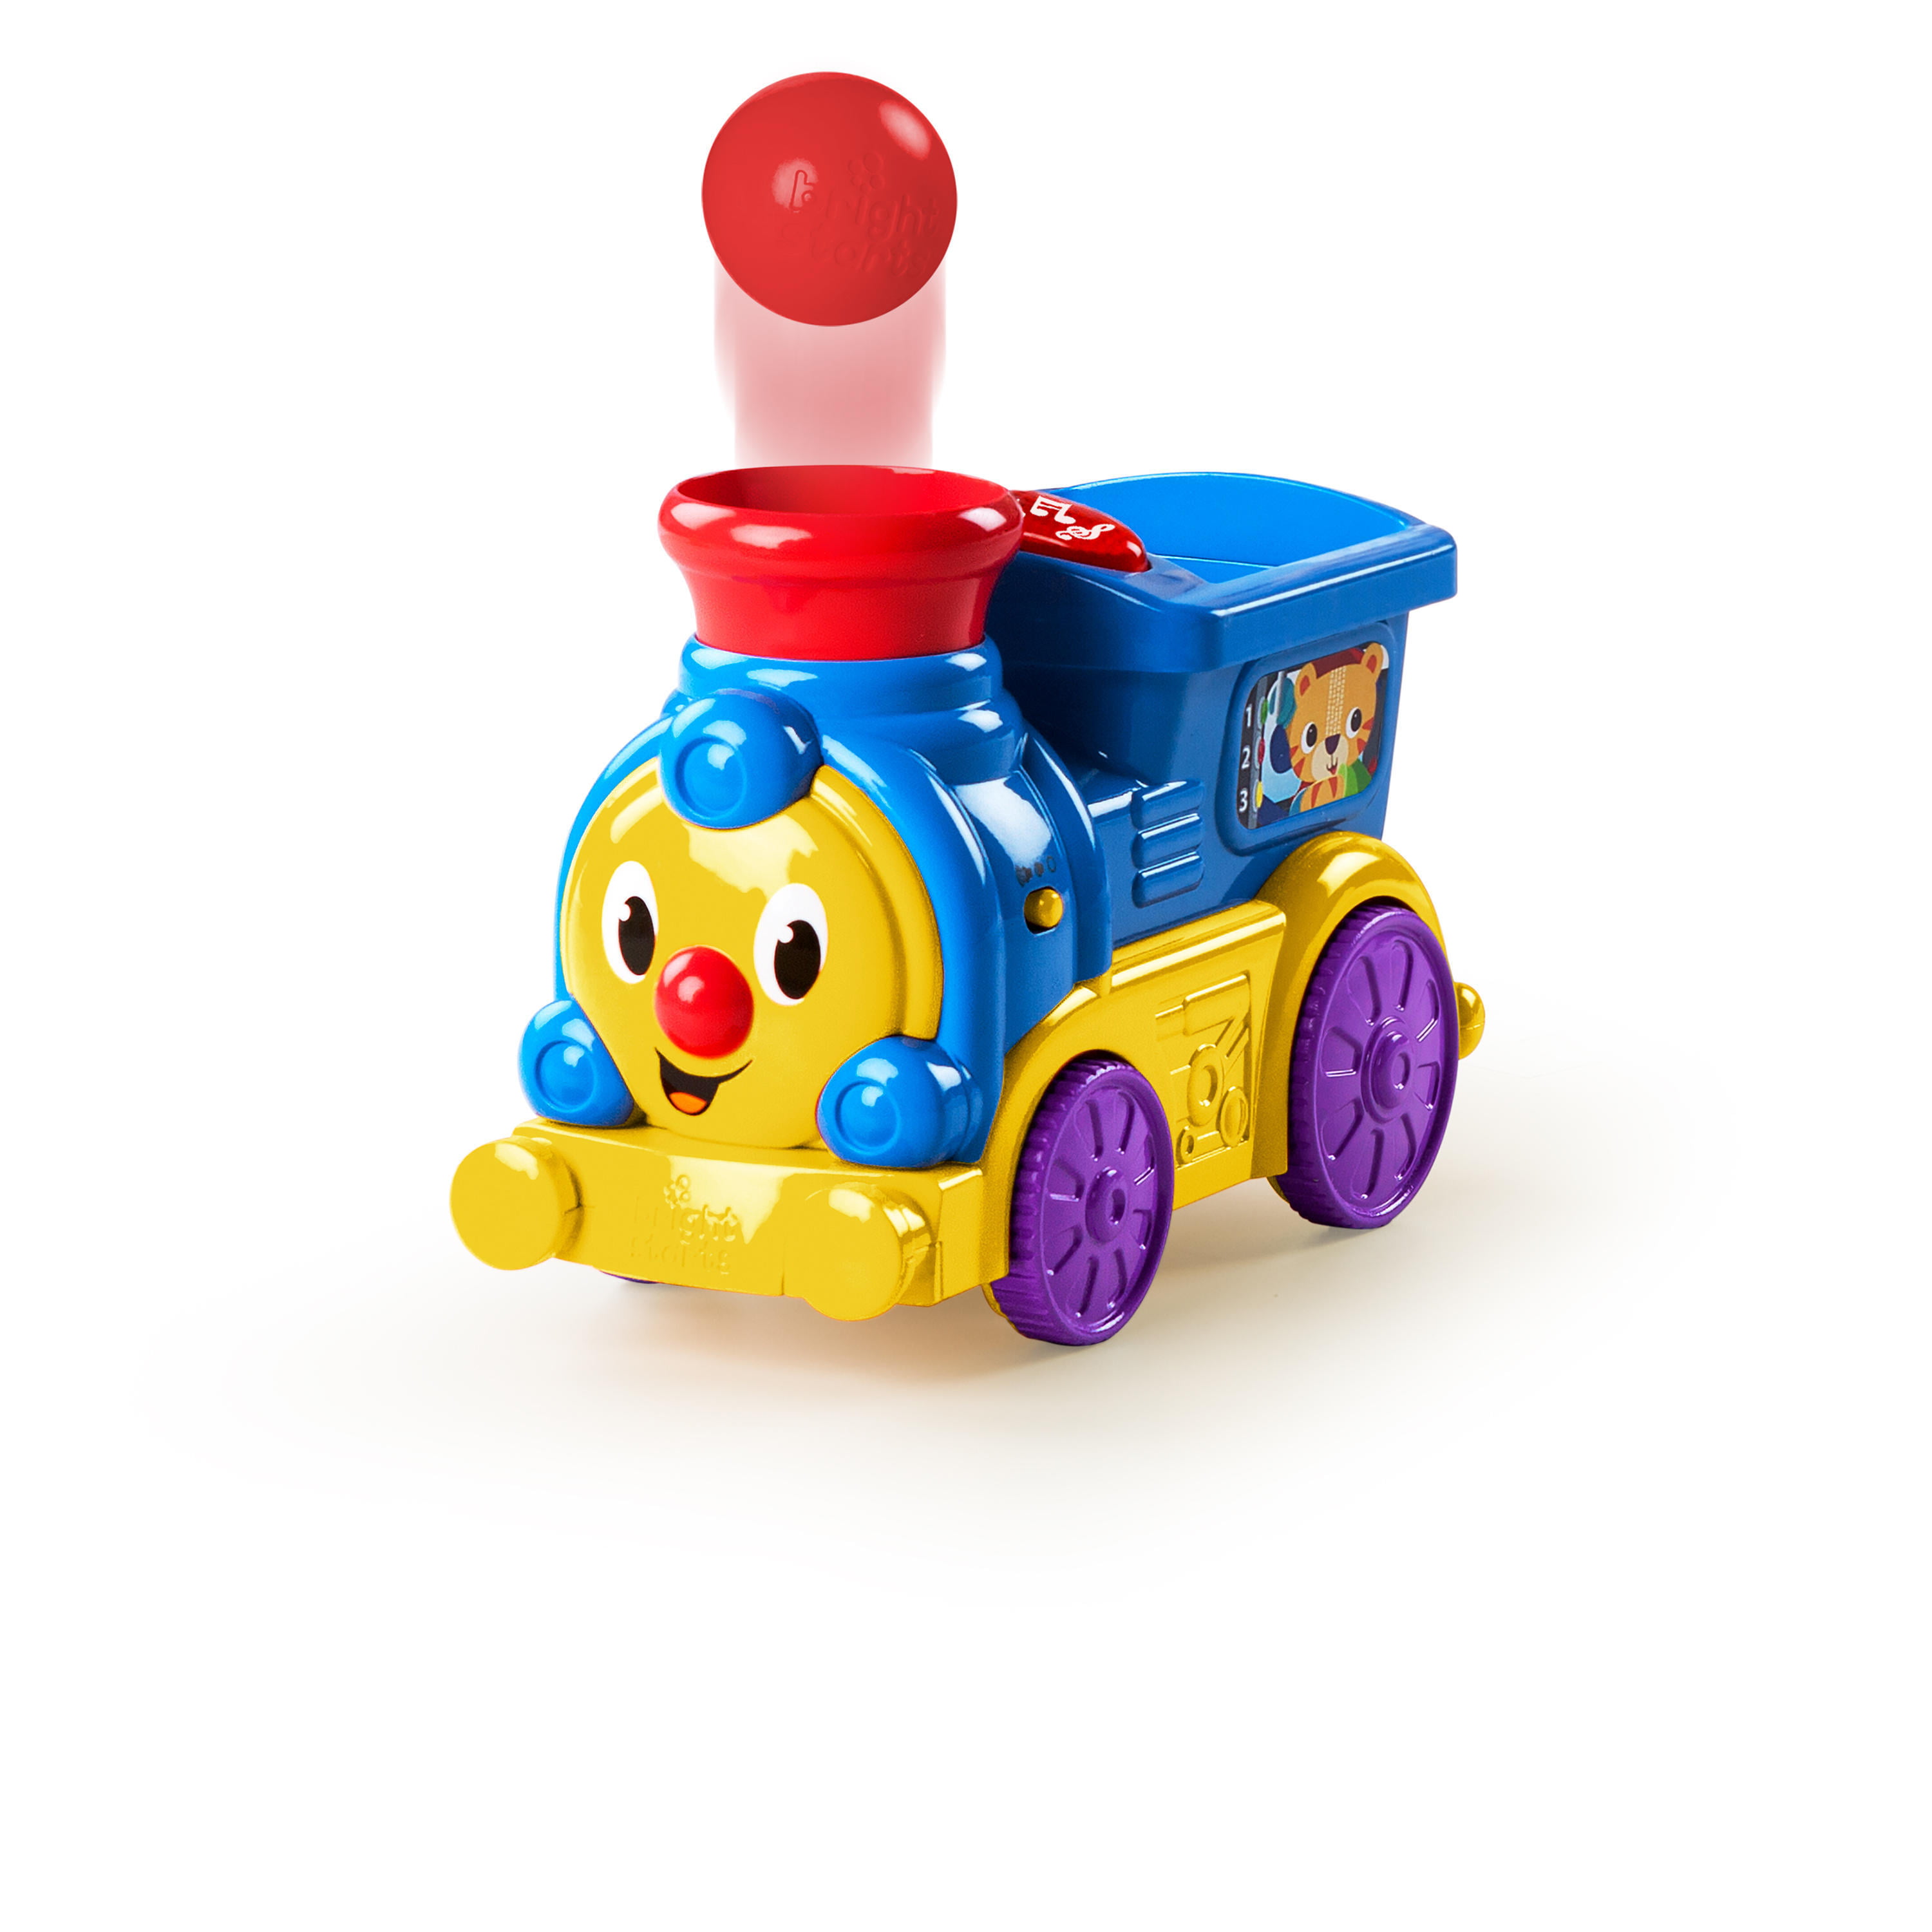 Ages 6 months Bright Starts Roll & Pop Train Toy Ball Popper Musical Activity 